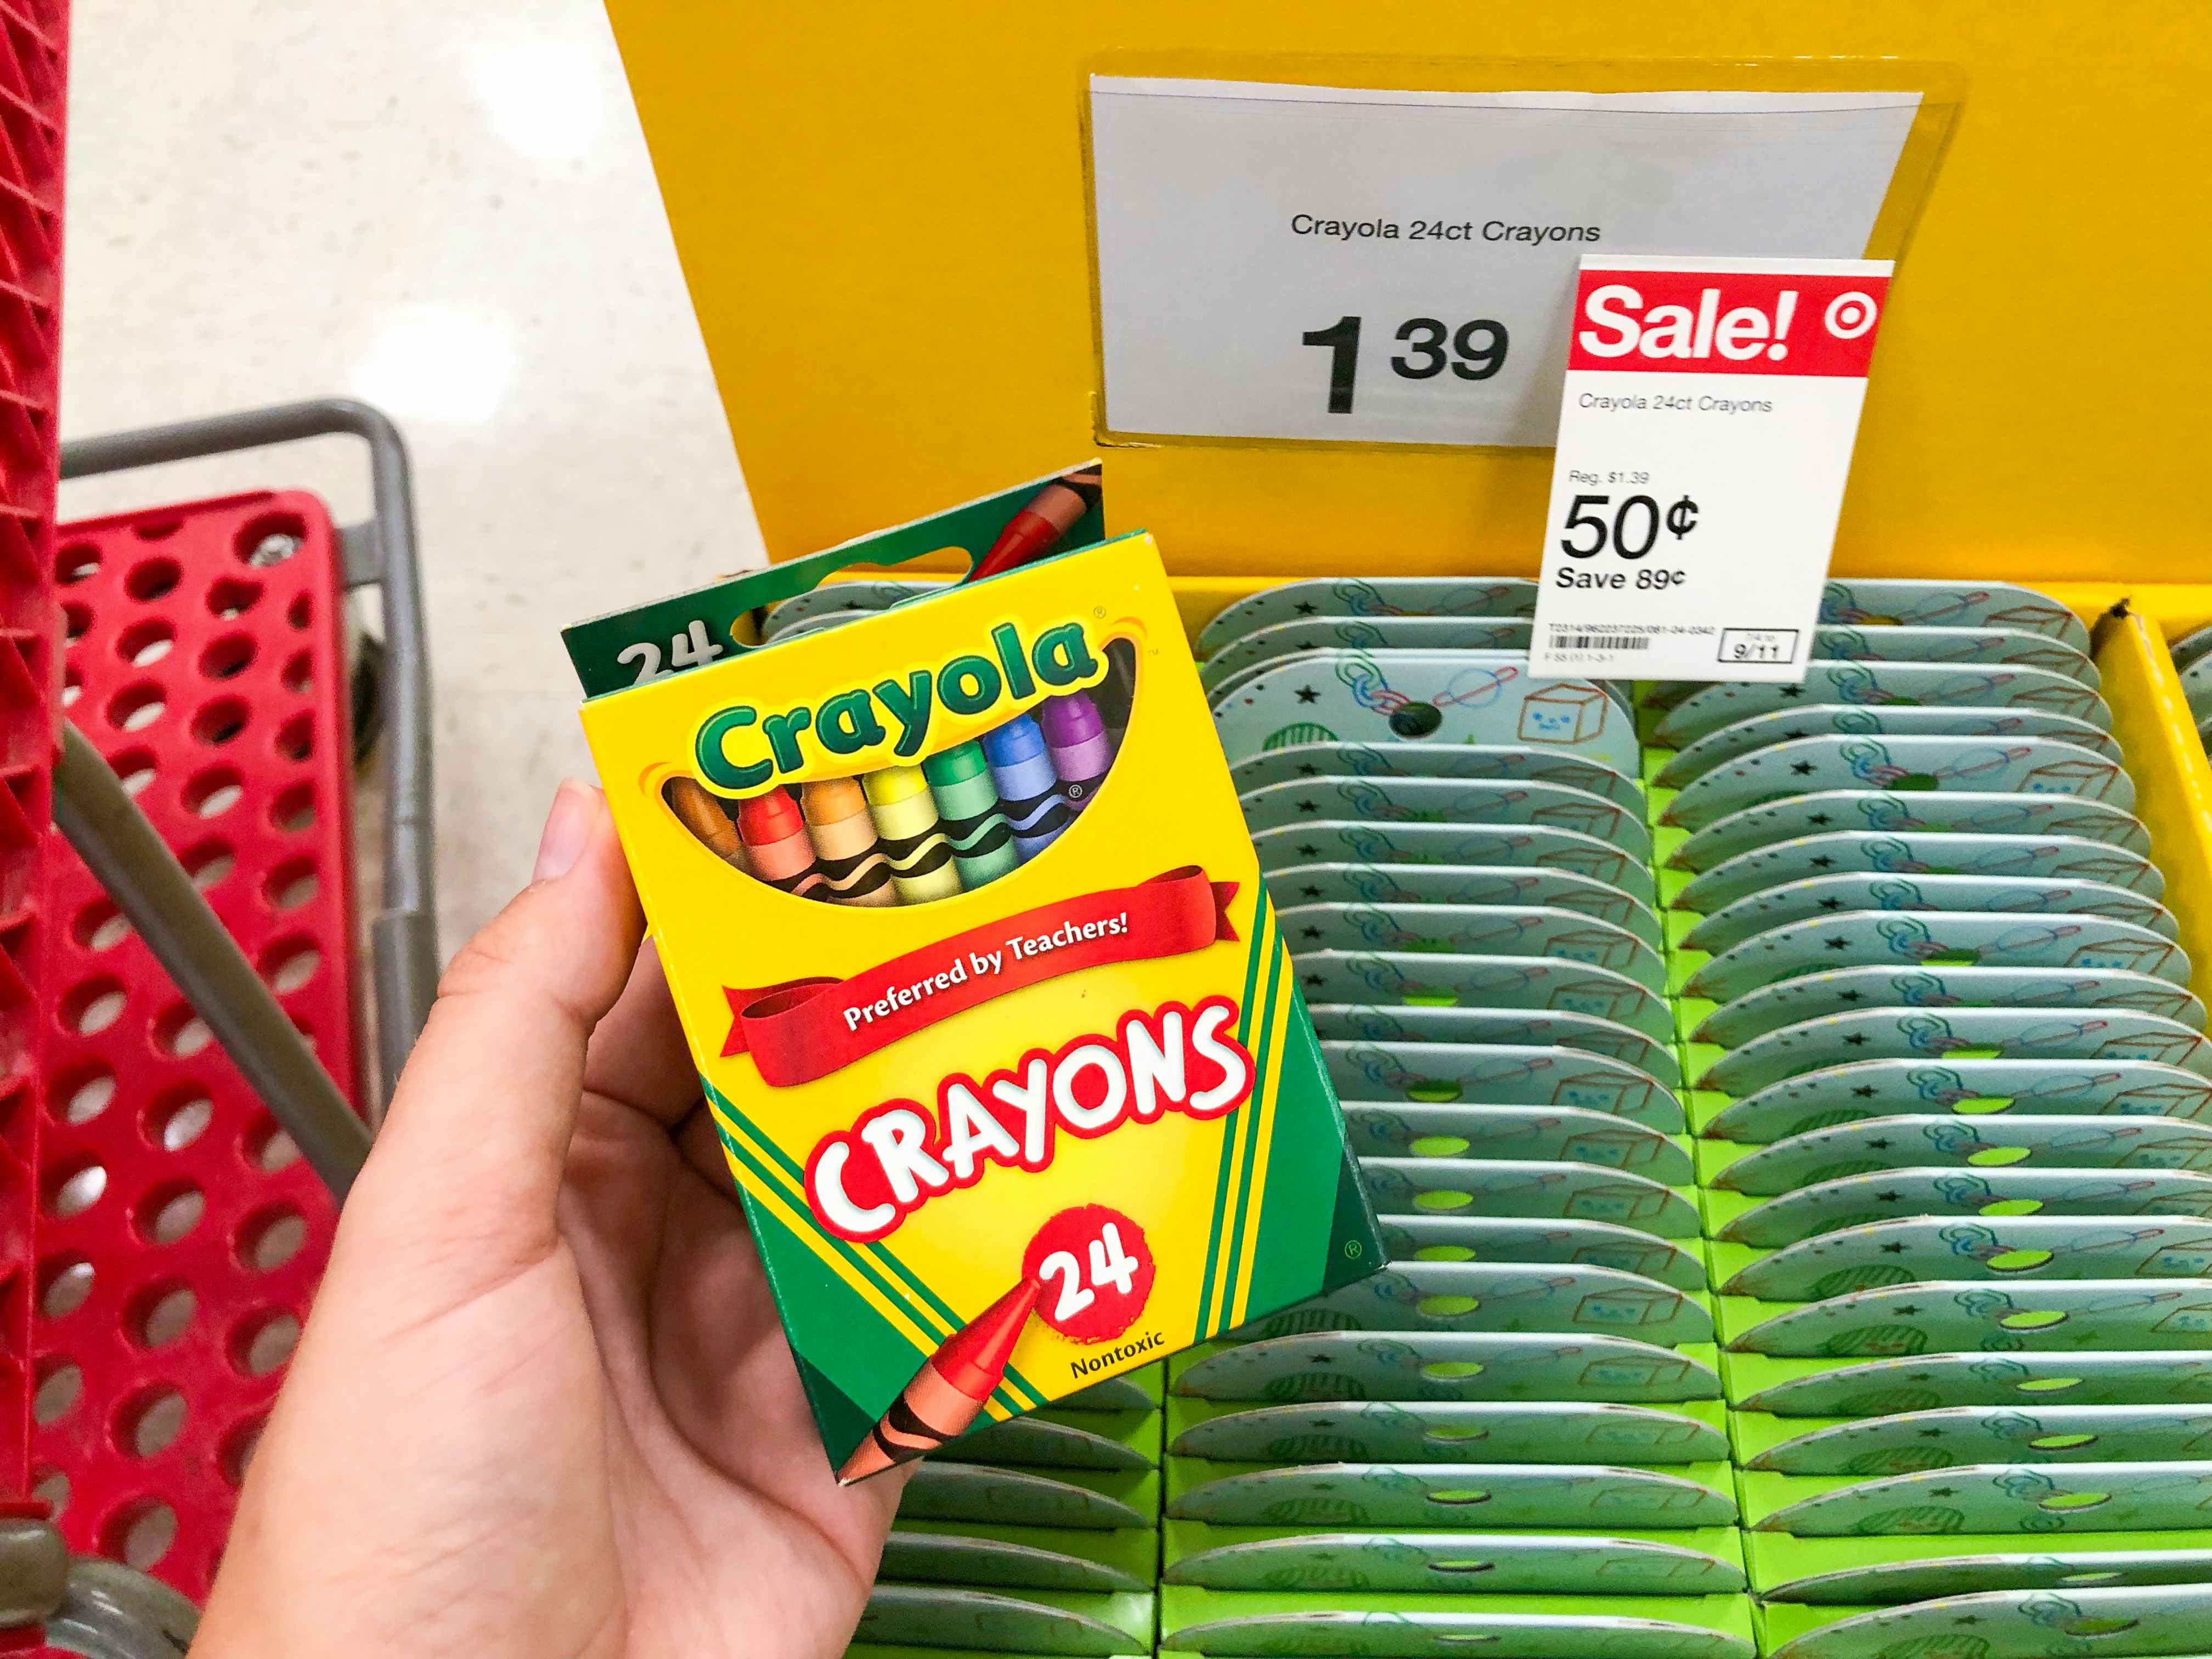 A person's hand holding a box of Crayola crayons in front of a sale tag marking them down to 50 cents each at Target.